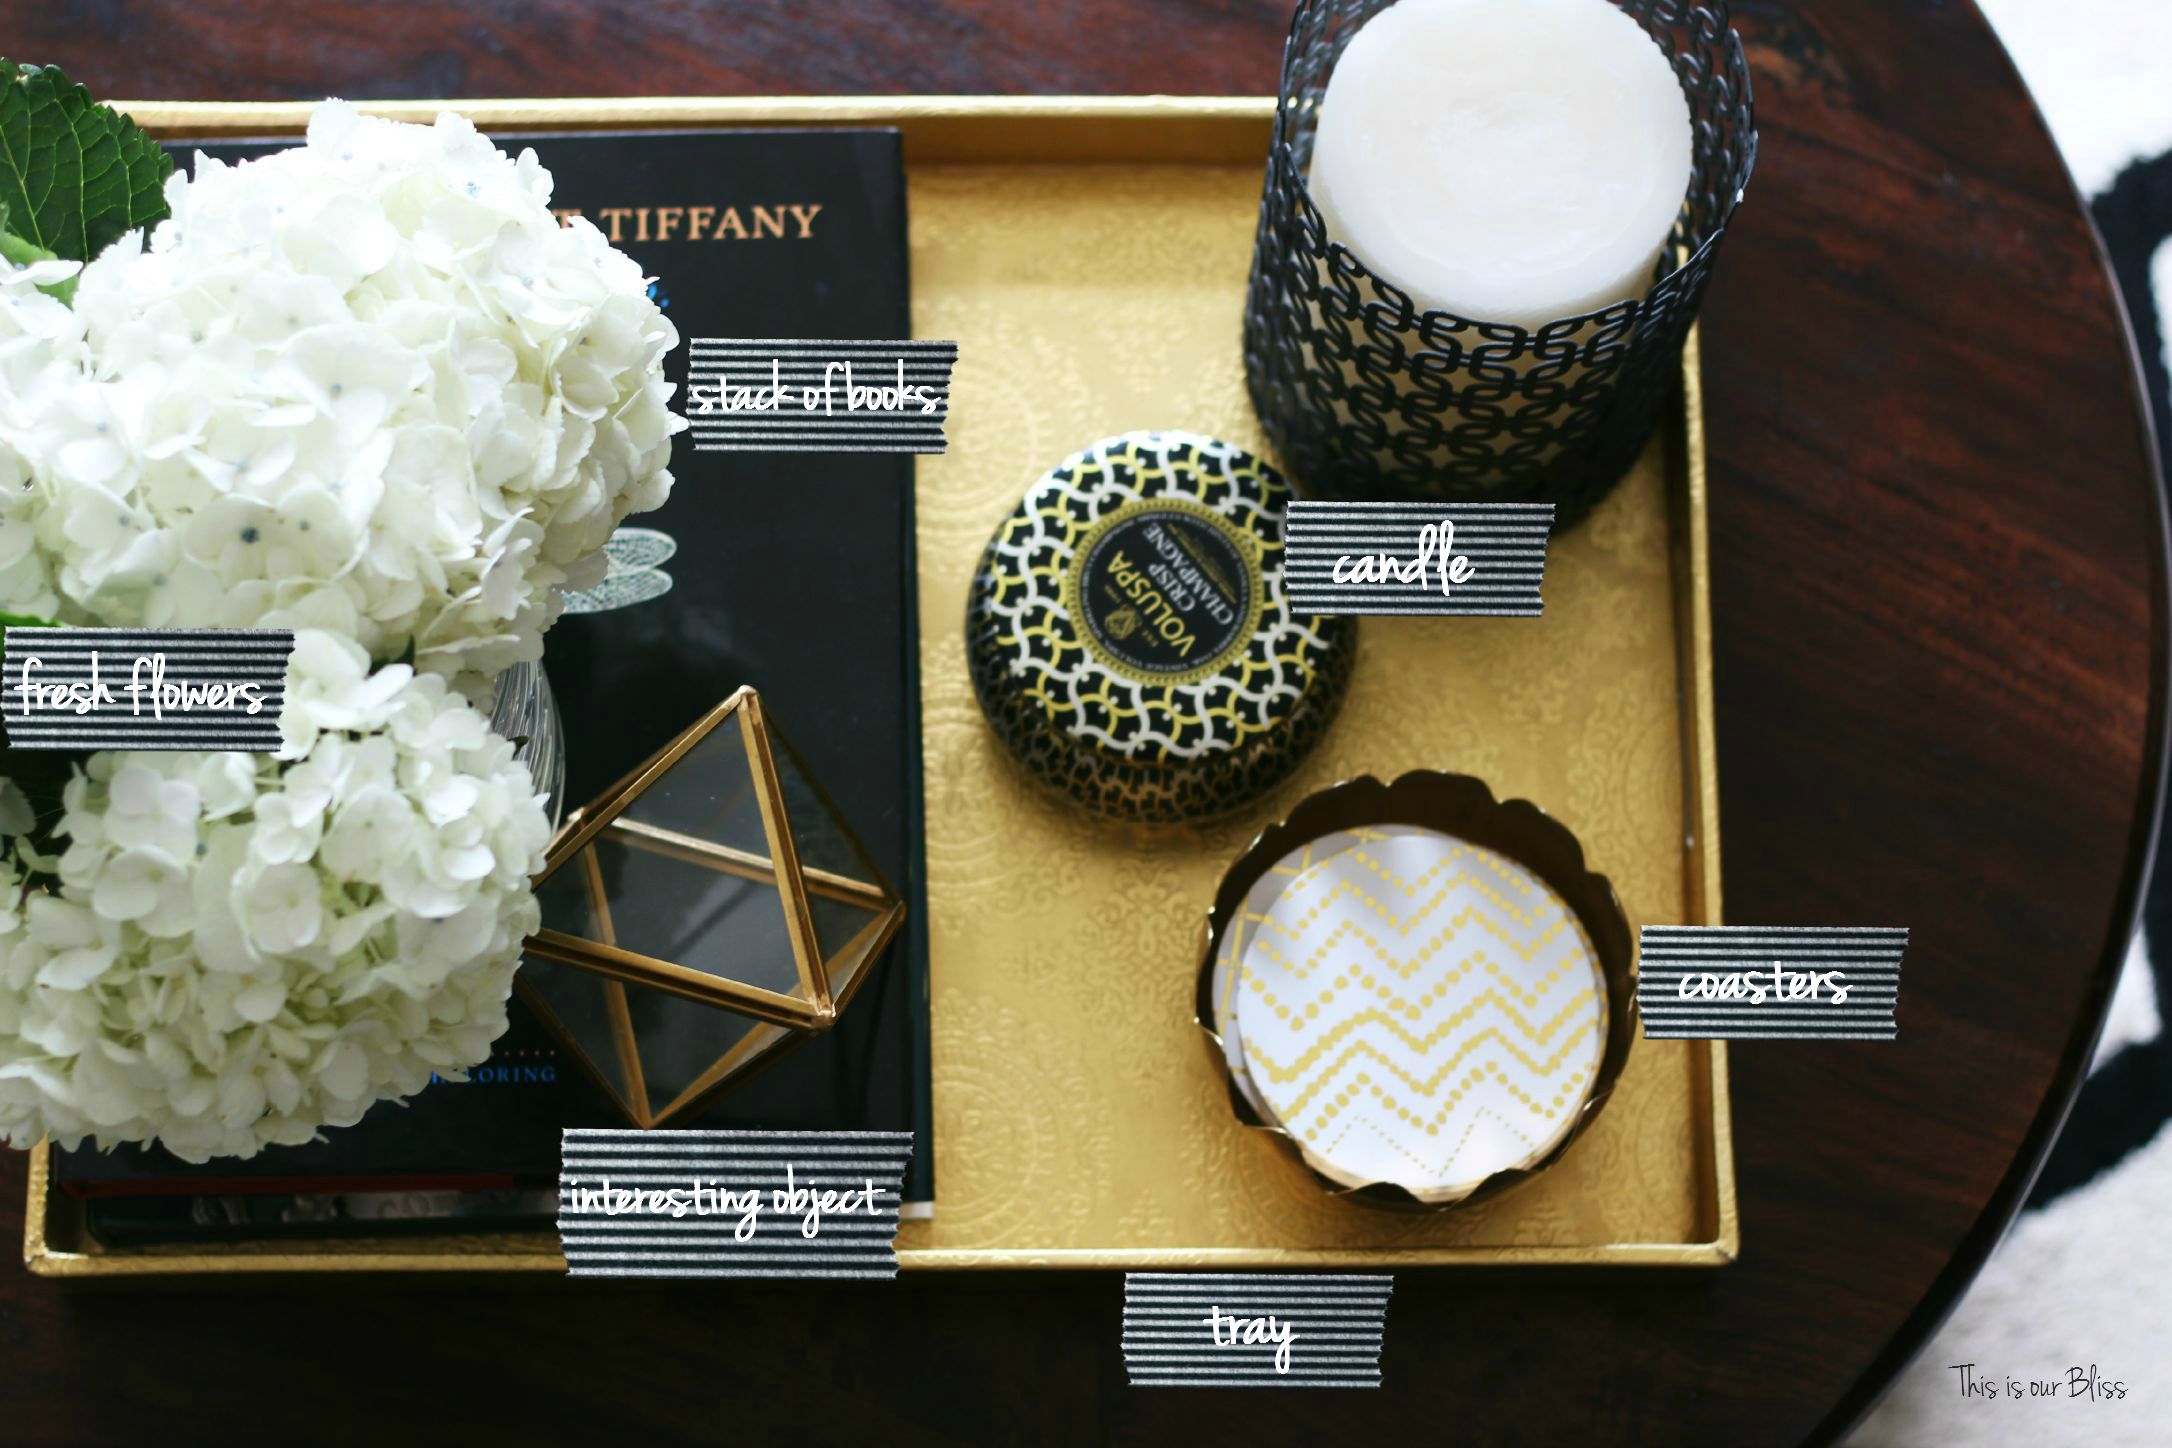 How to style a coffee table - coffee table styling - elements of a well-styled coffee table - 6 element labels - Back to Basics 2 - This is our Bliss